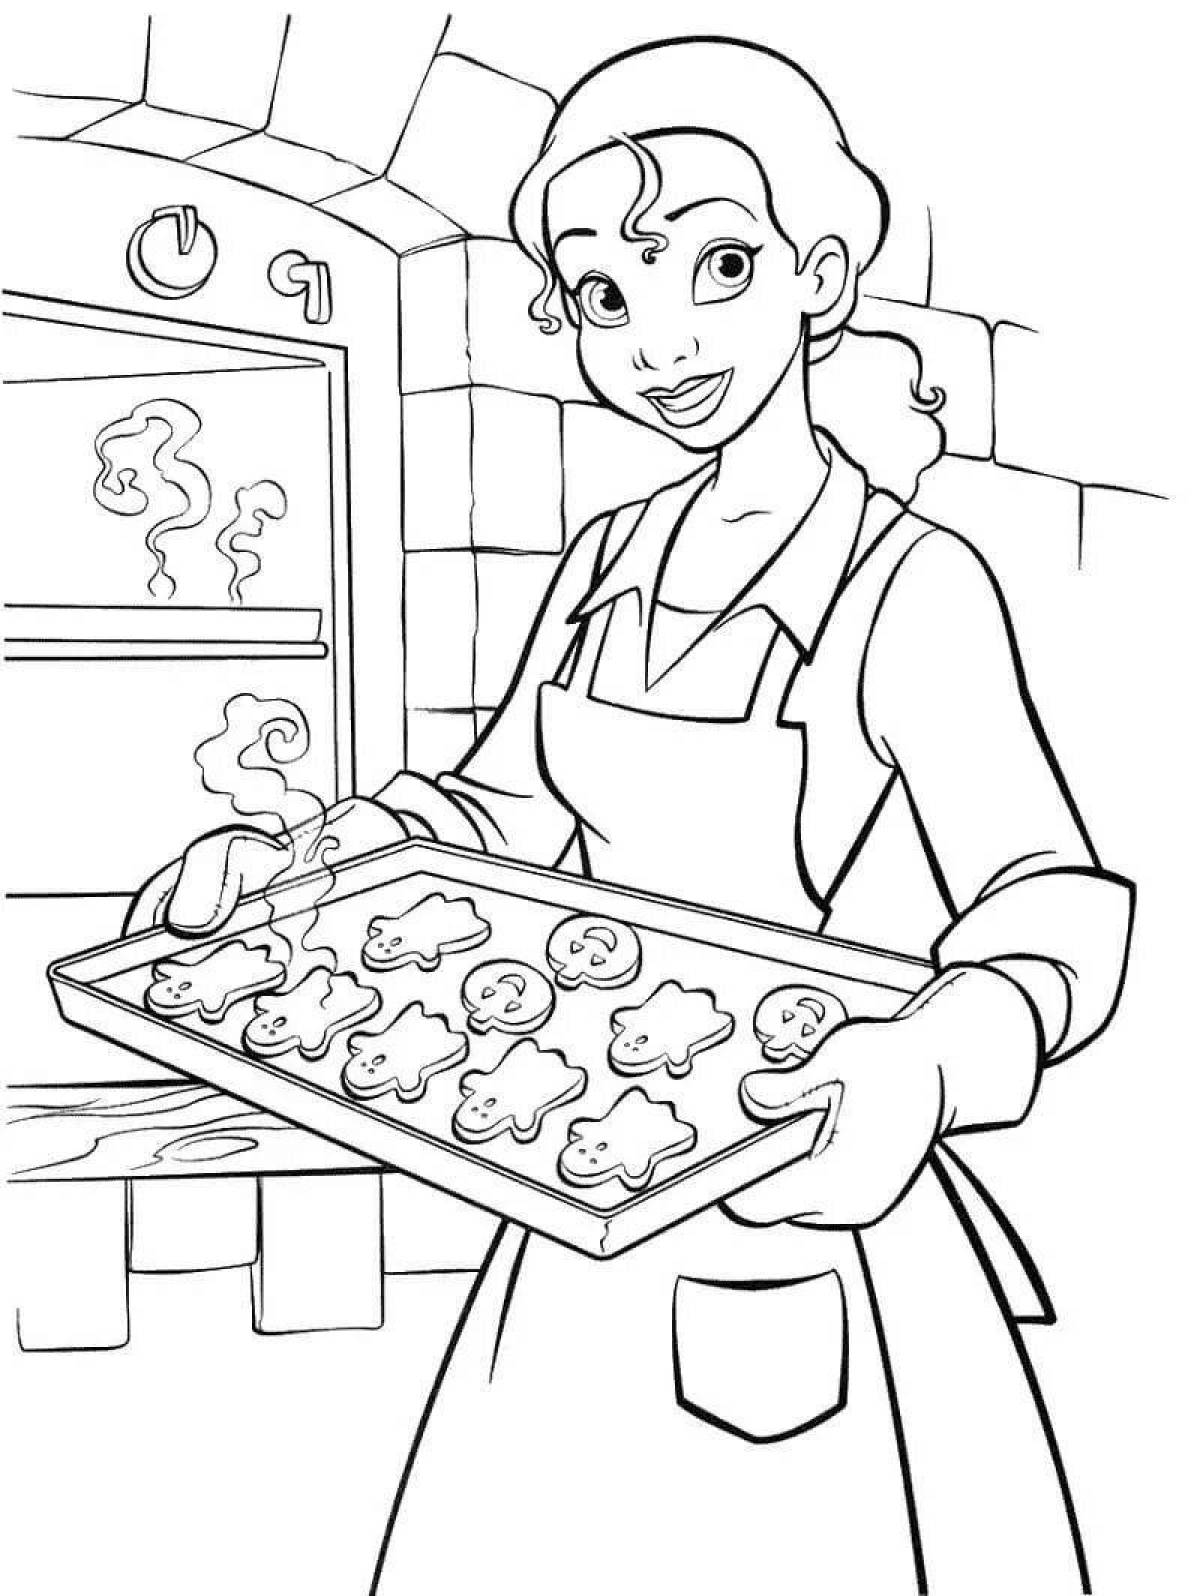 Glowing housewife coloring page